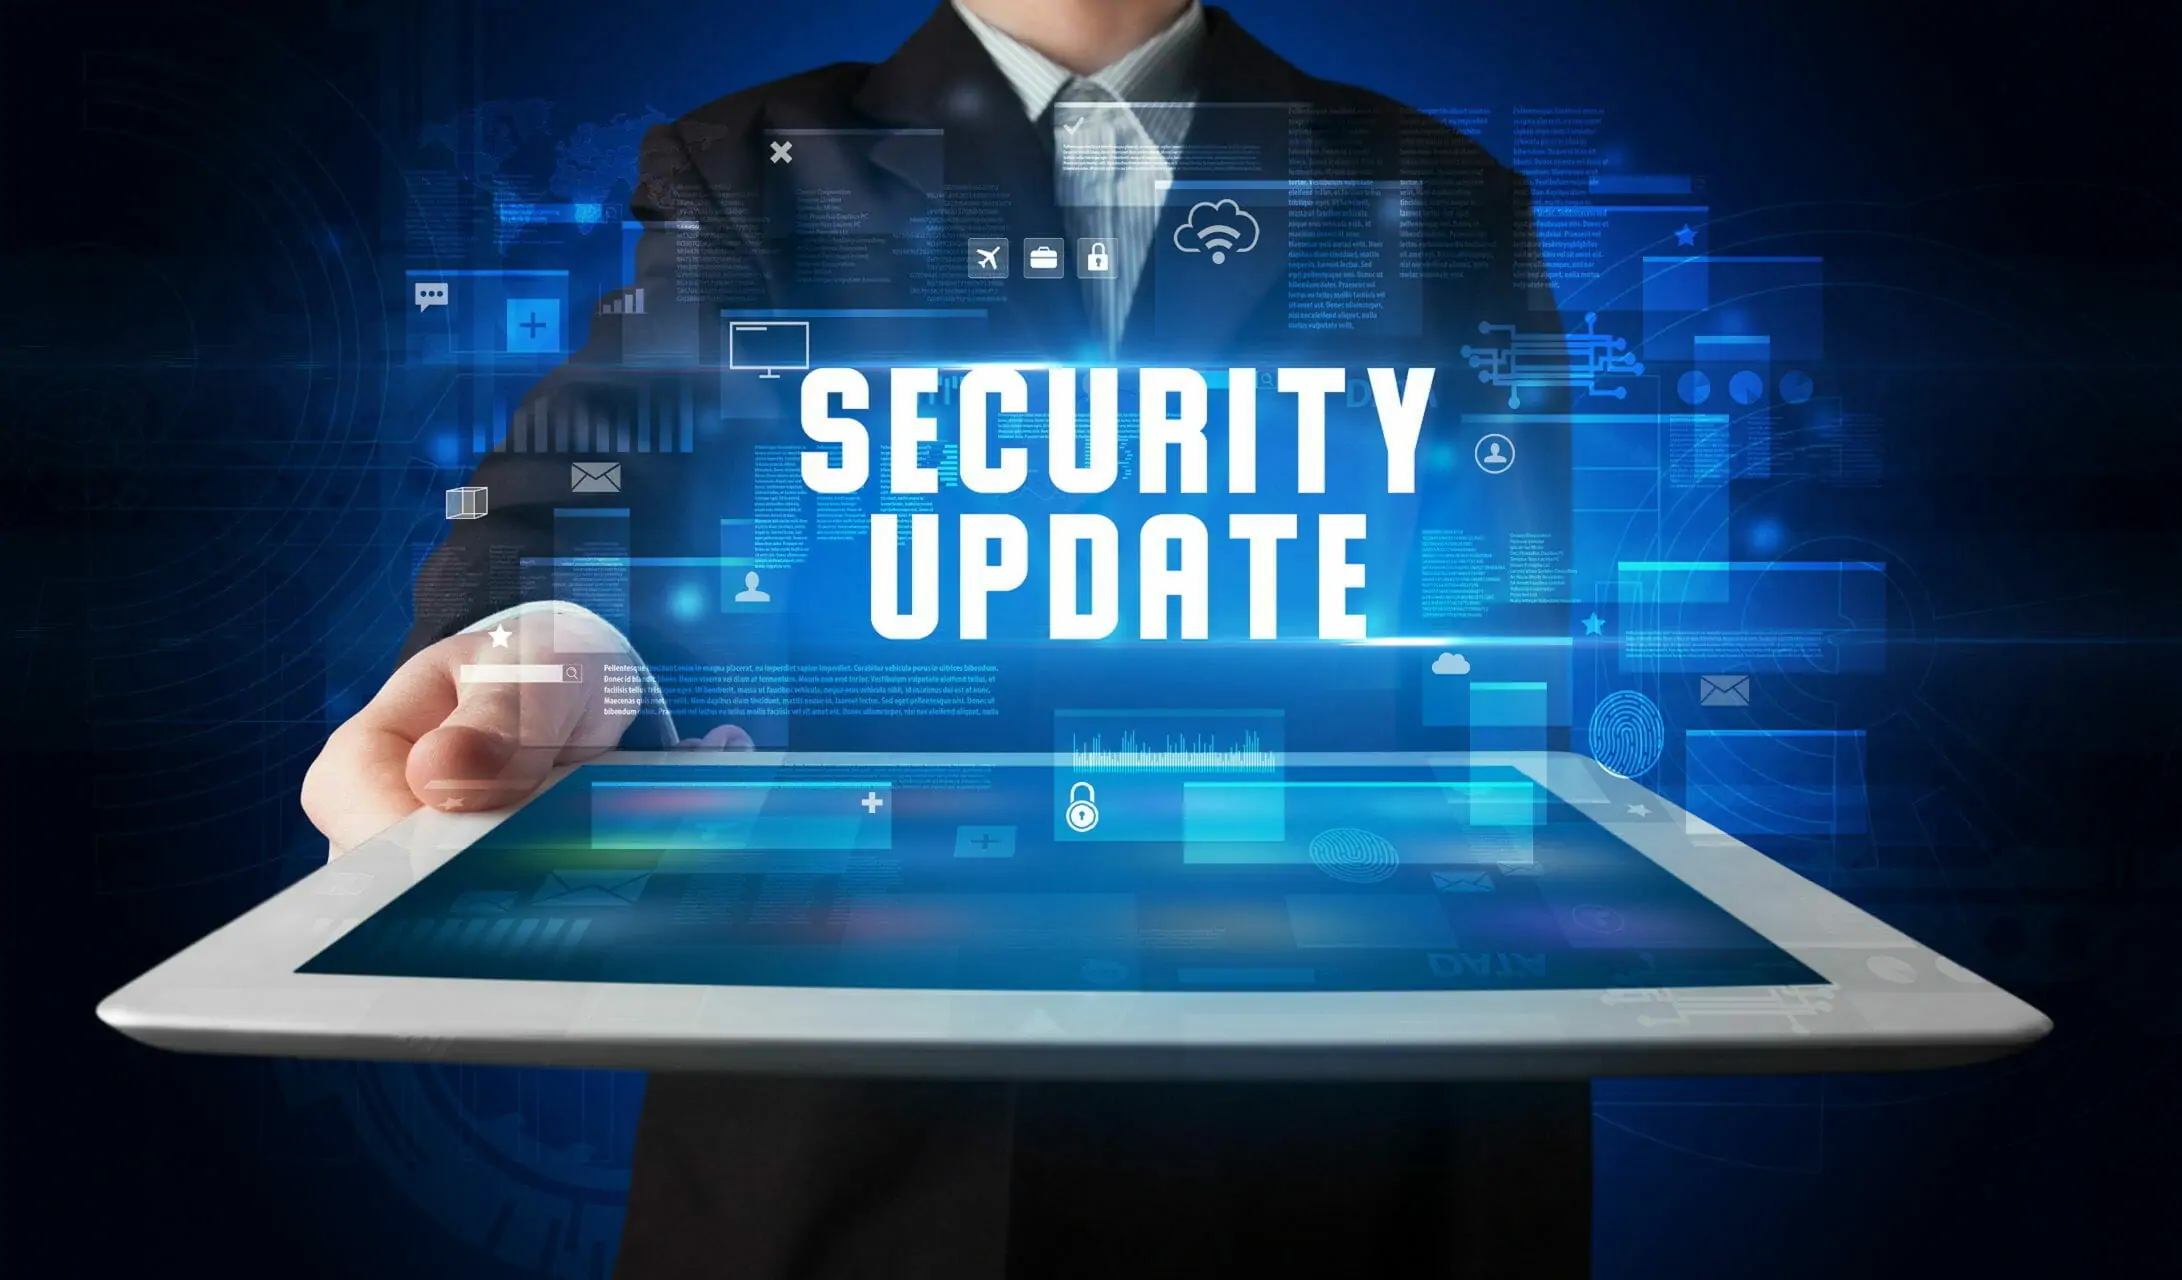 What is the latest Microsoft secutrity update